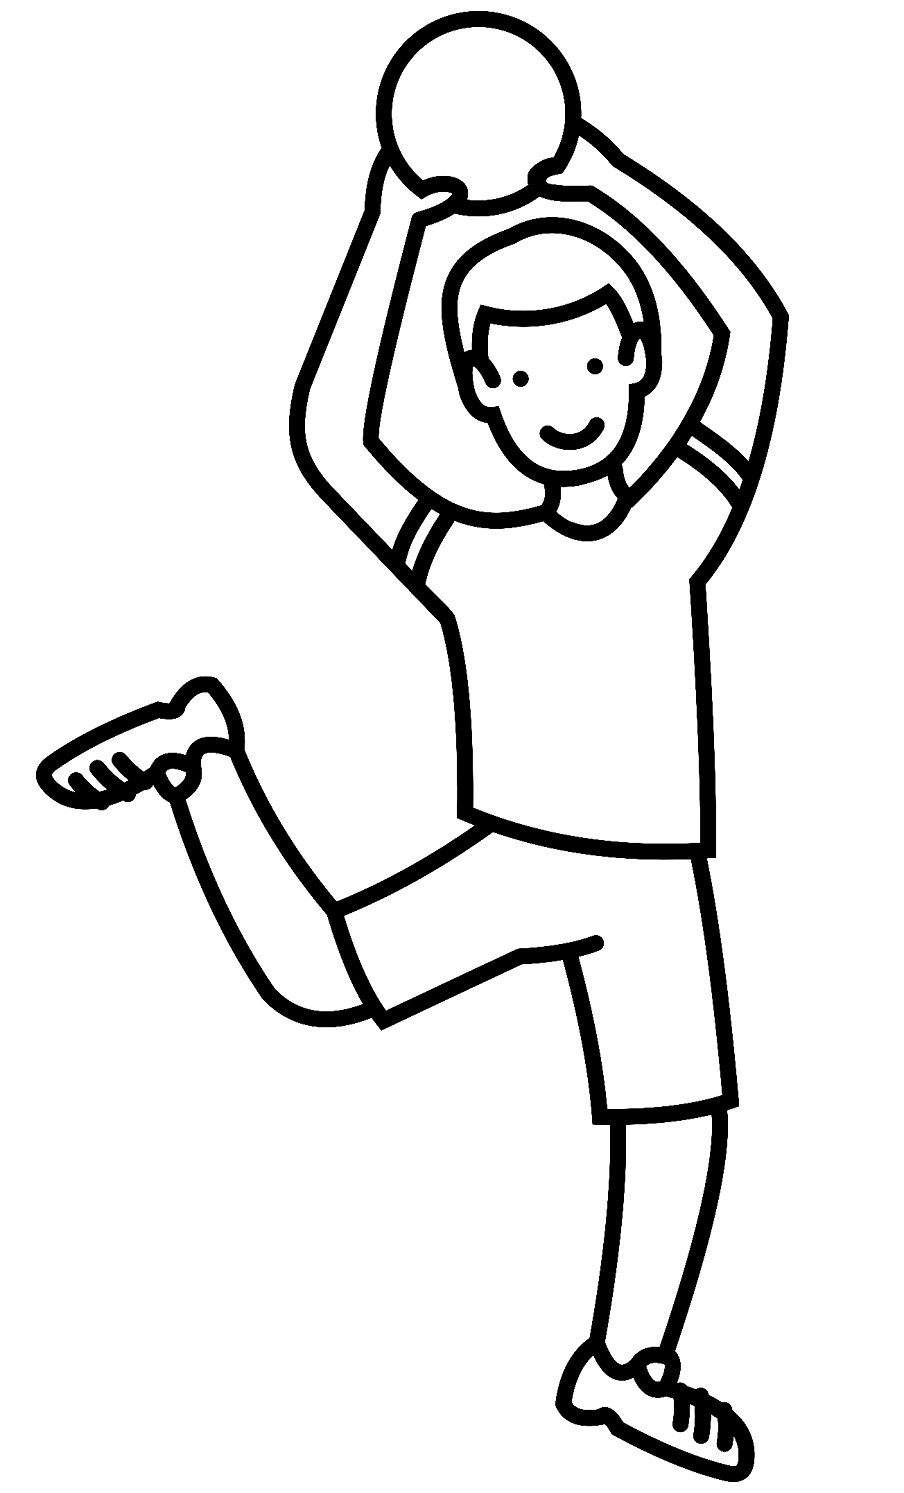 Dodgeball for Kids Coloring Page